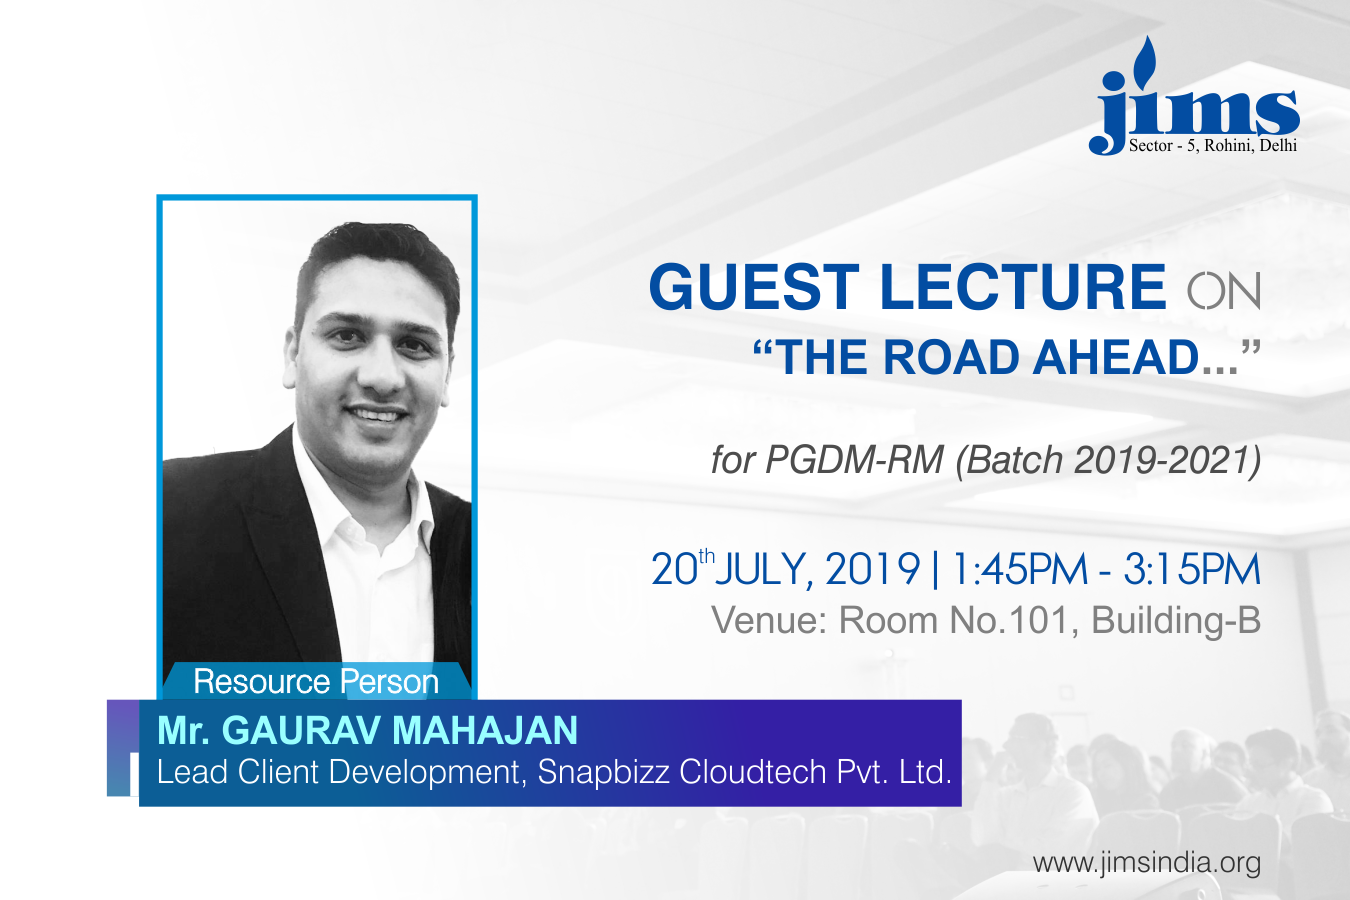 JIMS Rohini Organising Guest Lecture on The Road Ahead for PGDM-RM Students